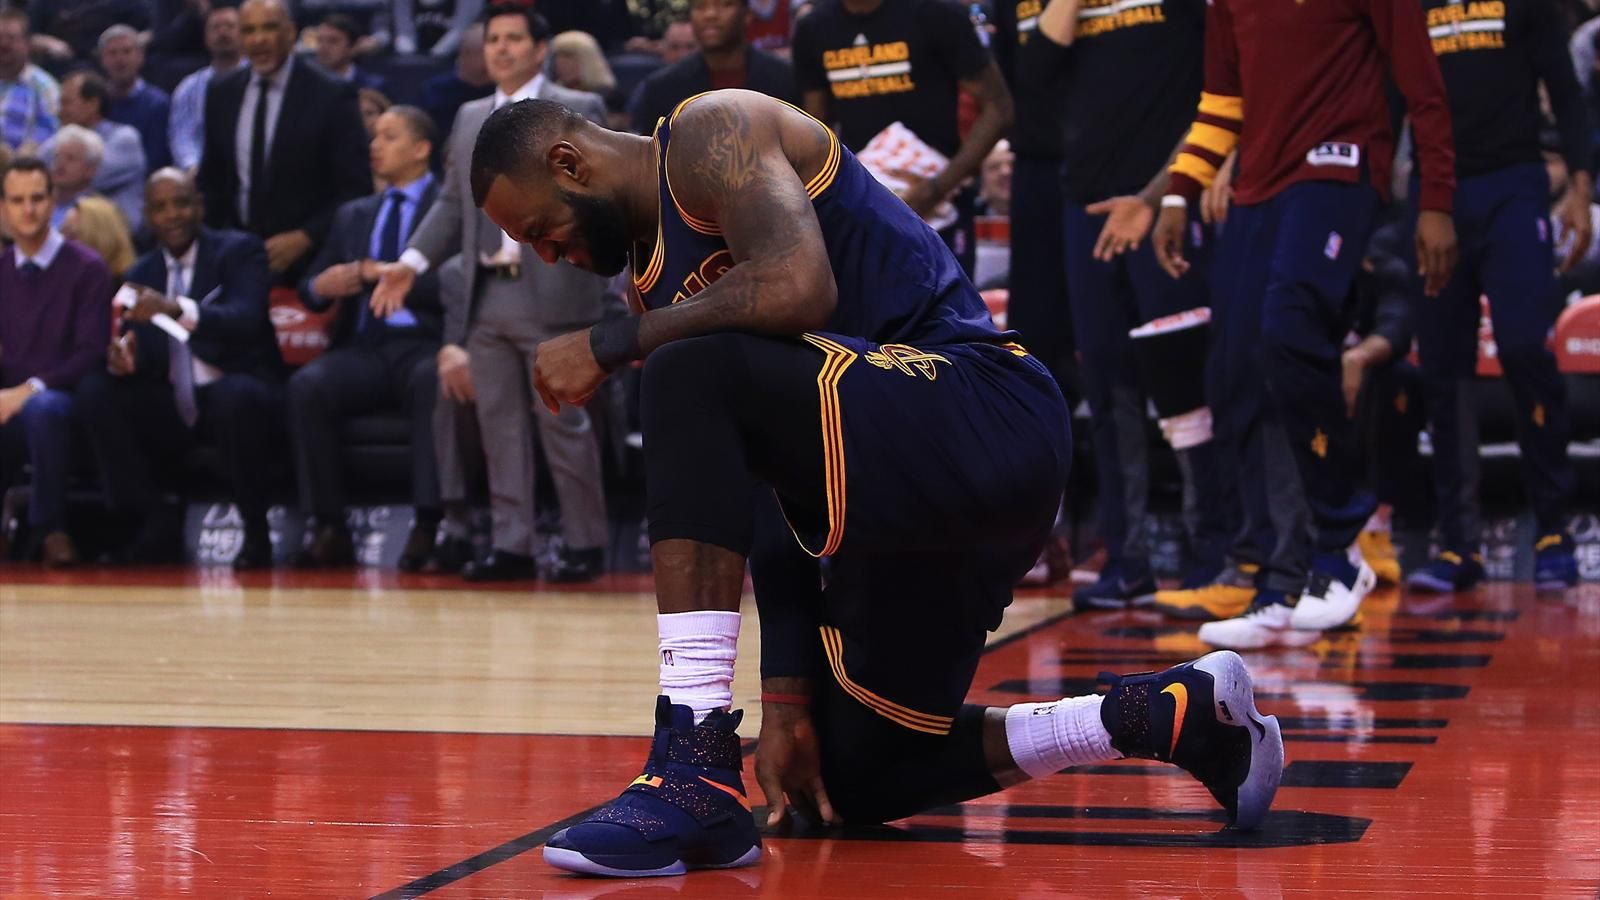 LeBron James missed shootaround, could be held out of tonight's game